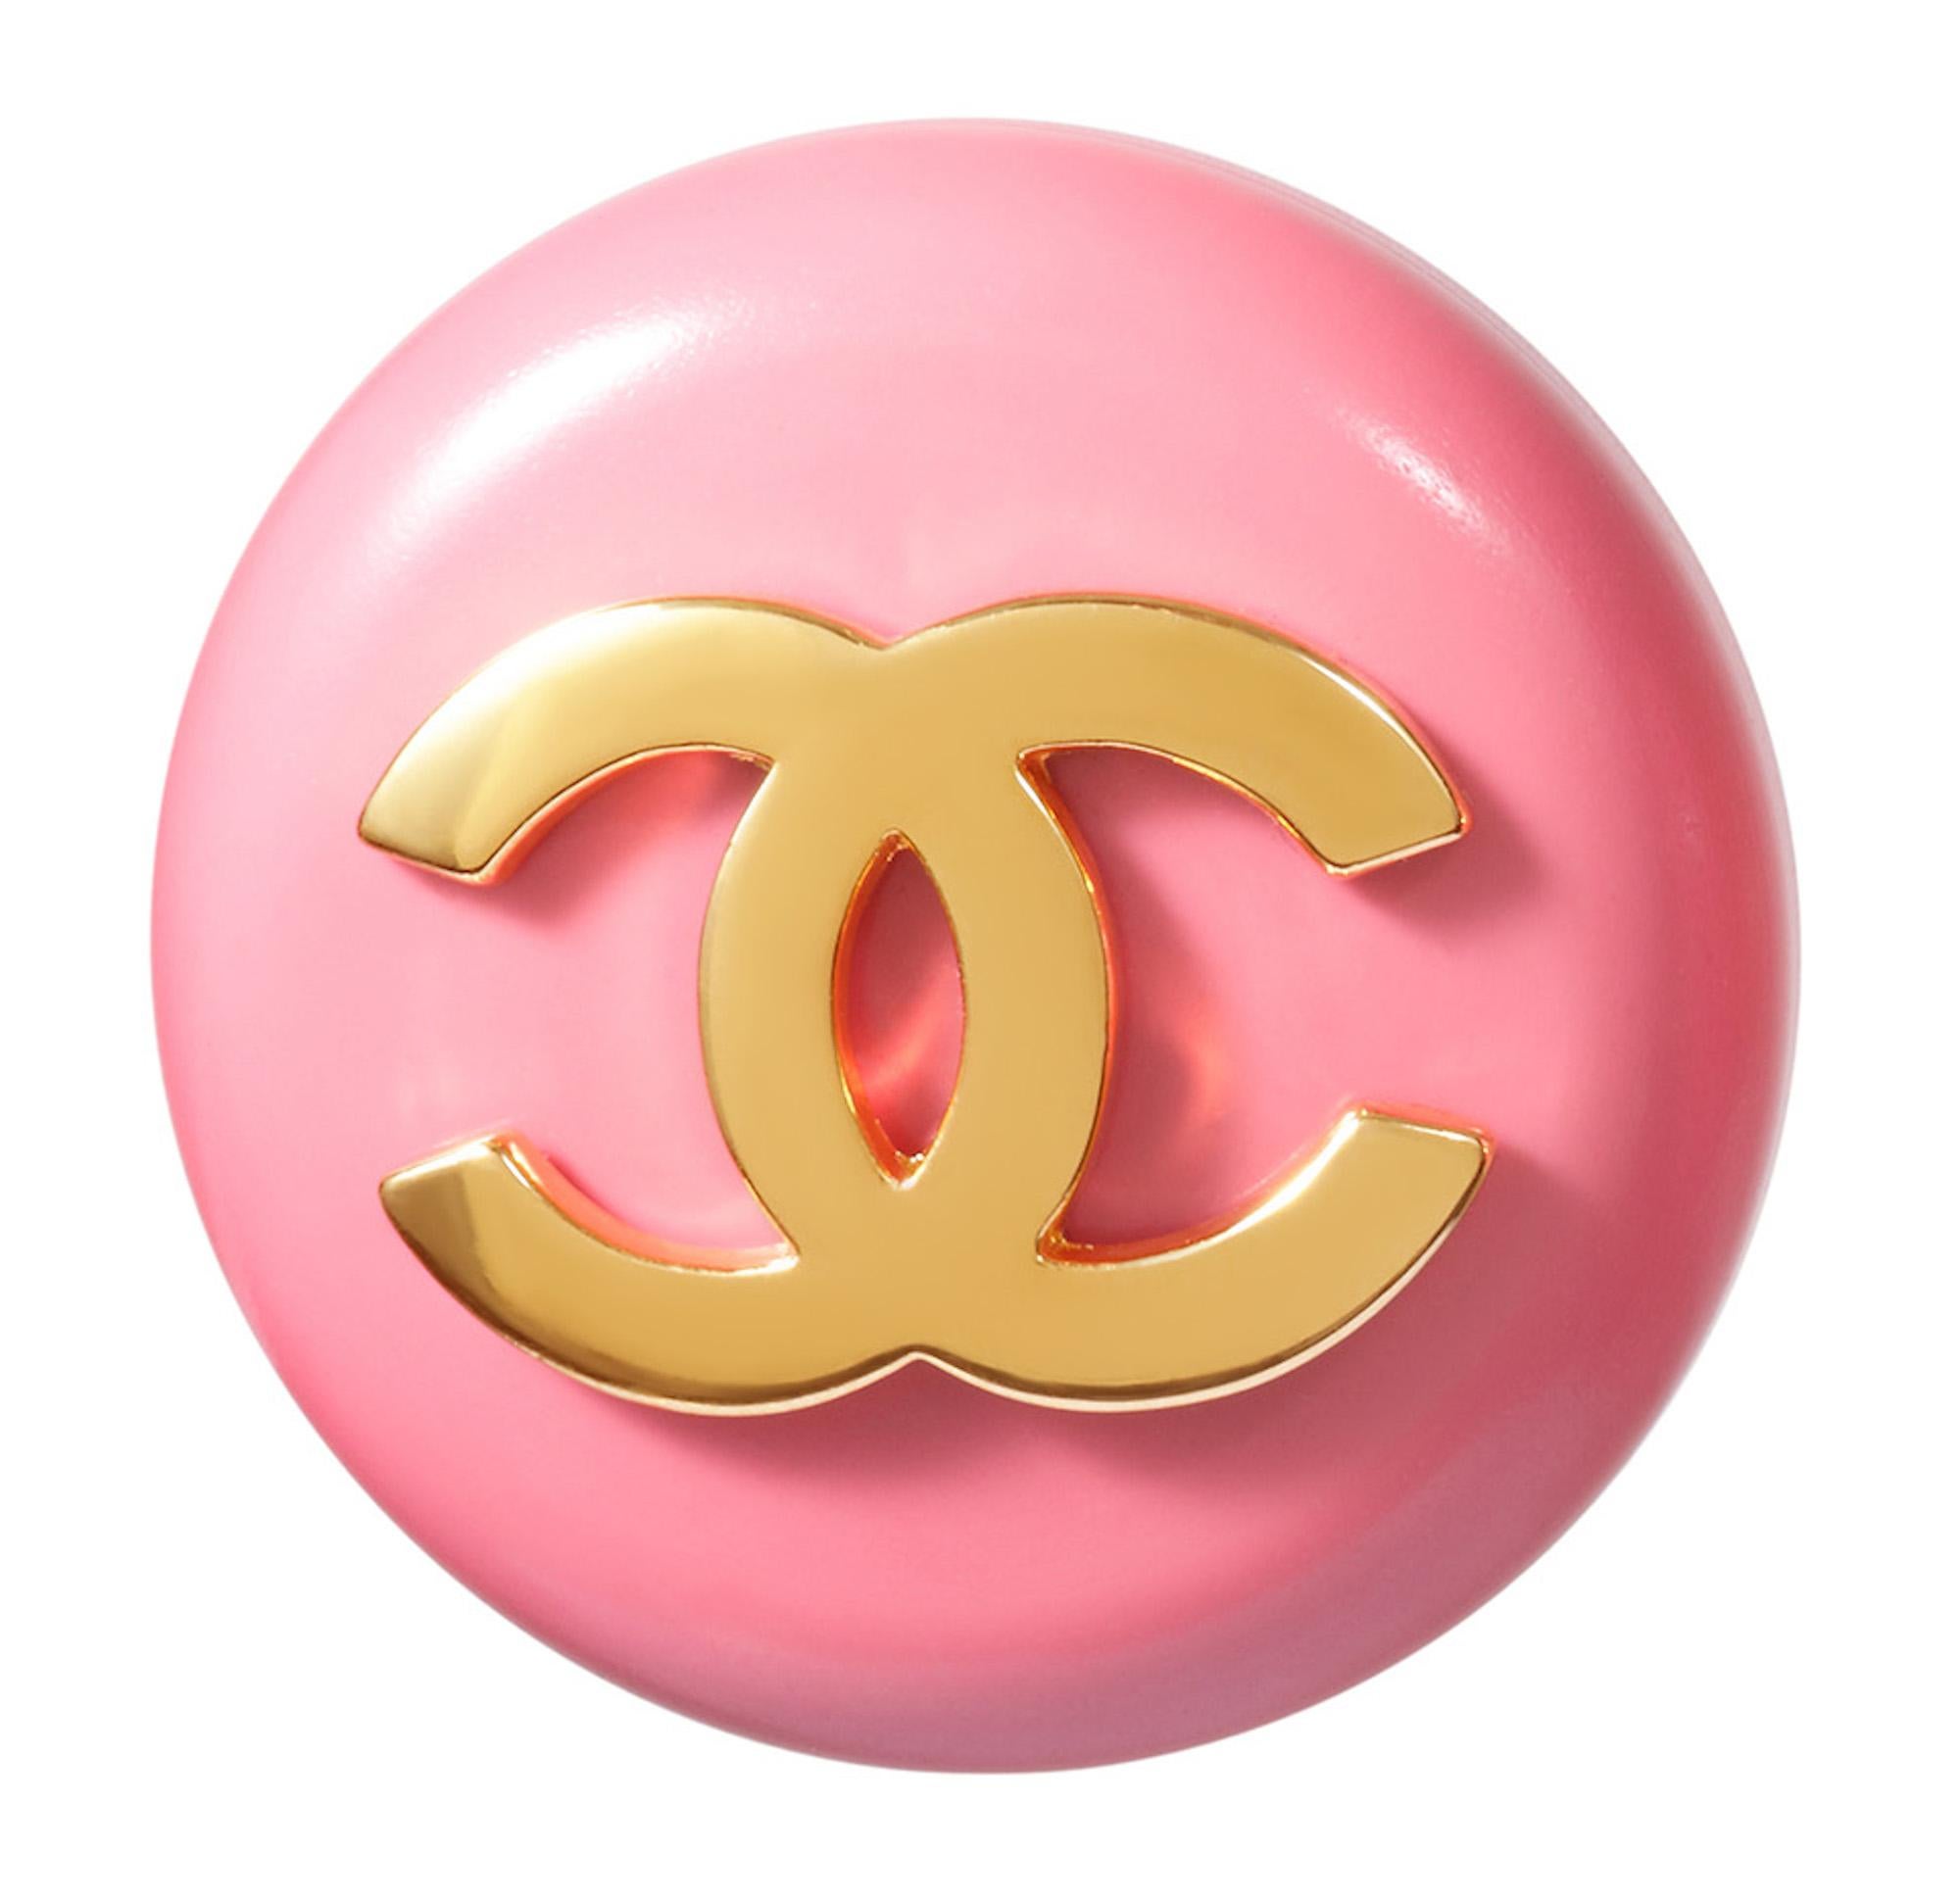 These fantastic 1980s Chanel pink lucite earrings feature a bold gold tone CC motif. Each piece measures 1.4 in diameter and is made of rose pink lucite mounted on a gold-plated backing. The designers signature is located below the clip fastenings